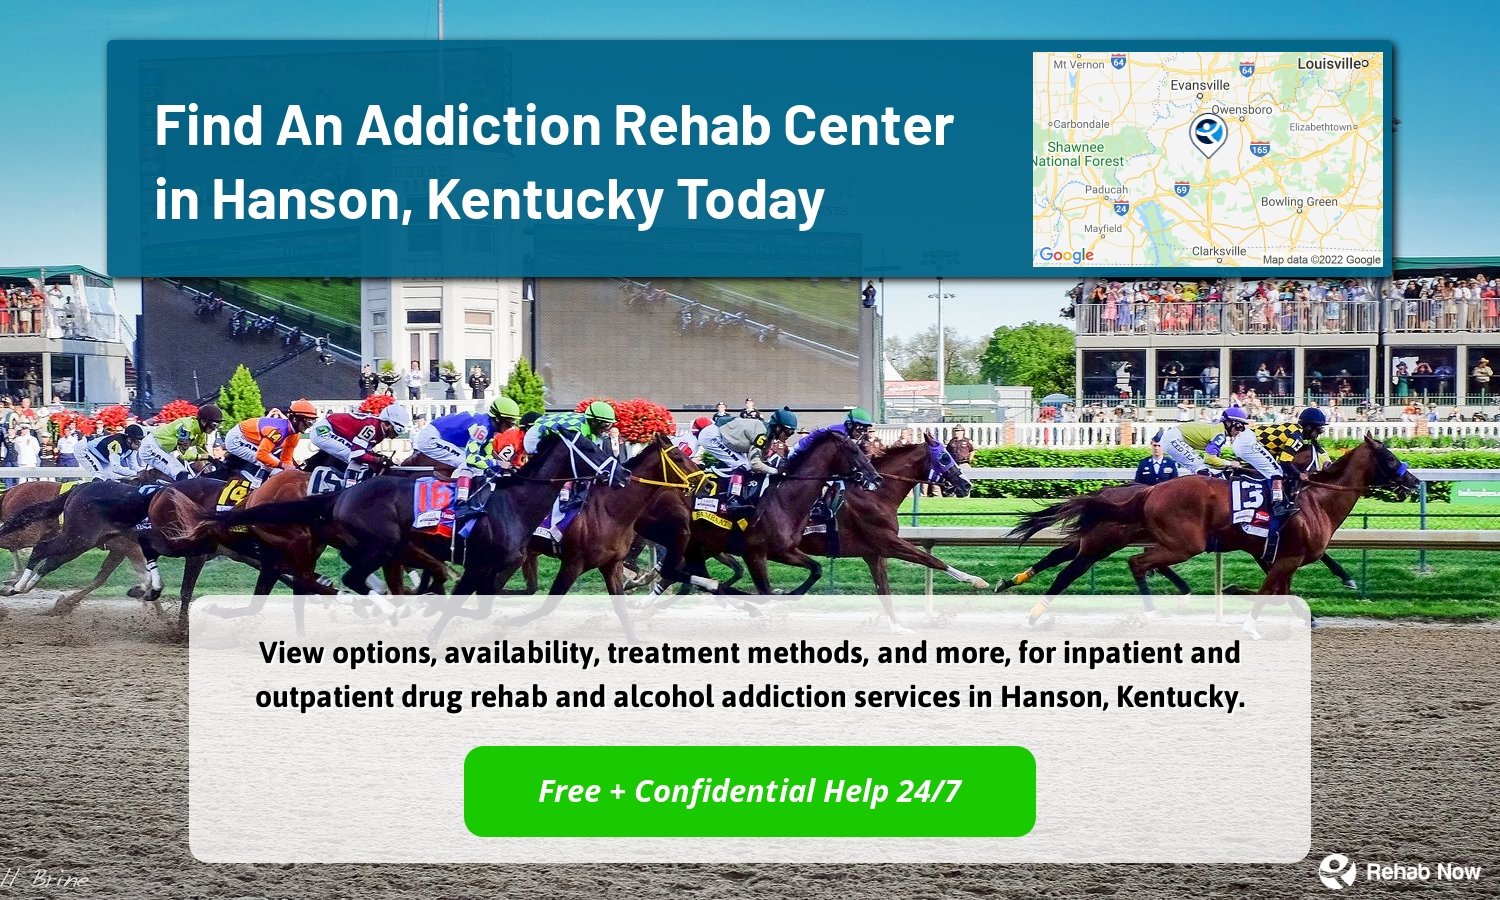 View options, availability, treatment methods, and more, for inpatient and outpatient drug rehab and alcohol addiction services in Hanson, Kentucky.